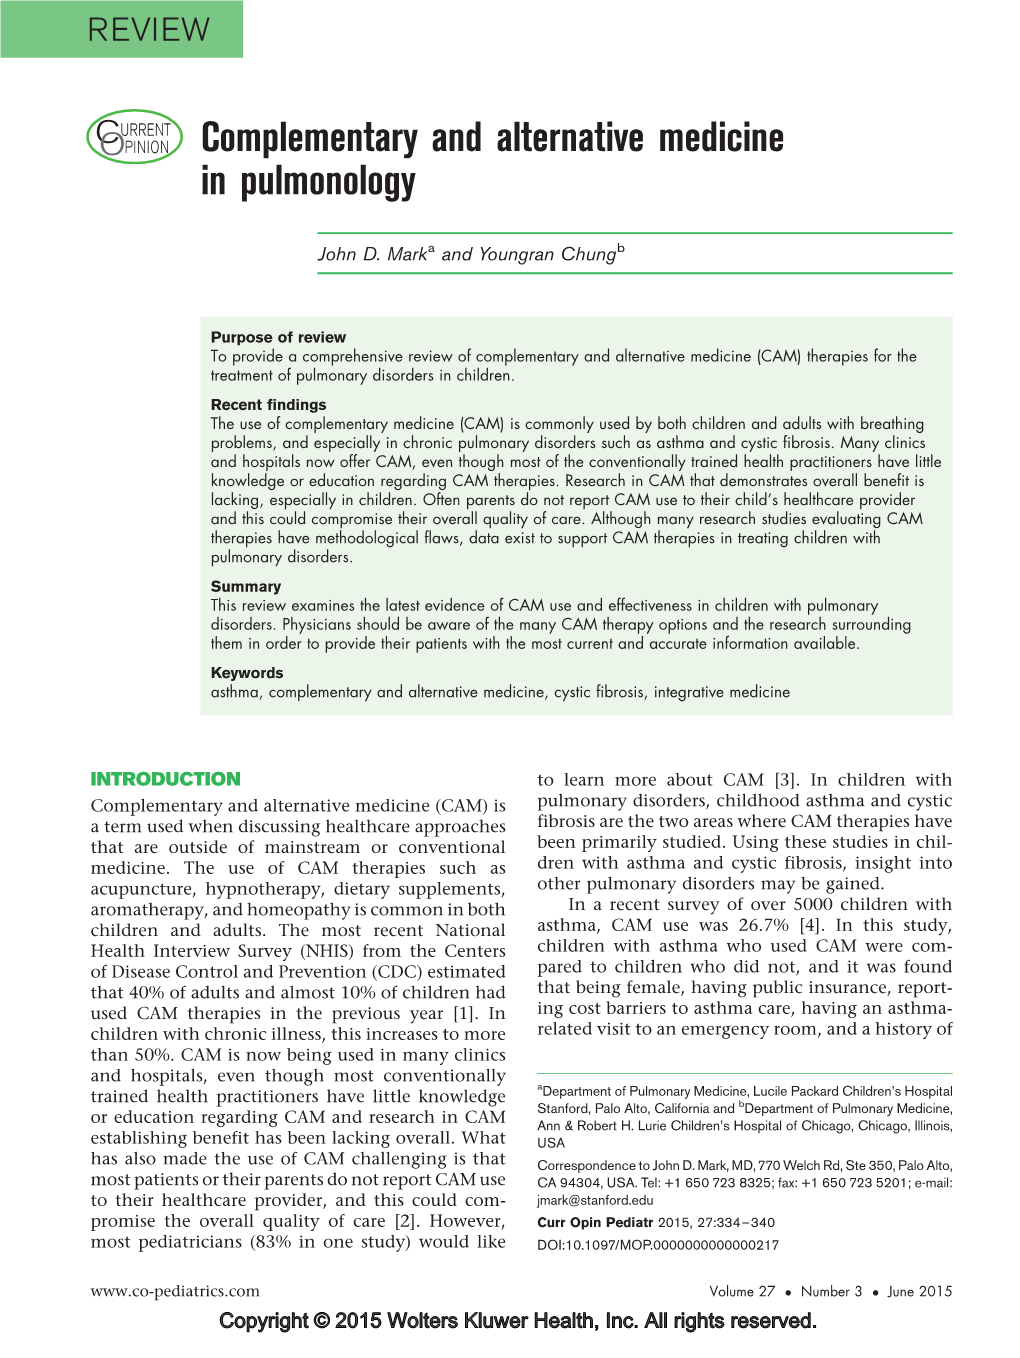 Complementary and Alternative Medicine in Pulmonology